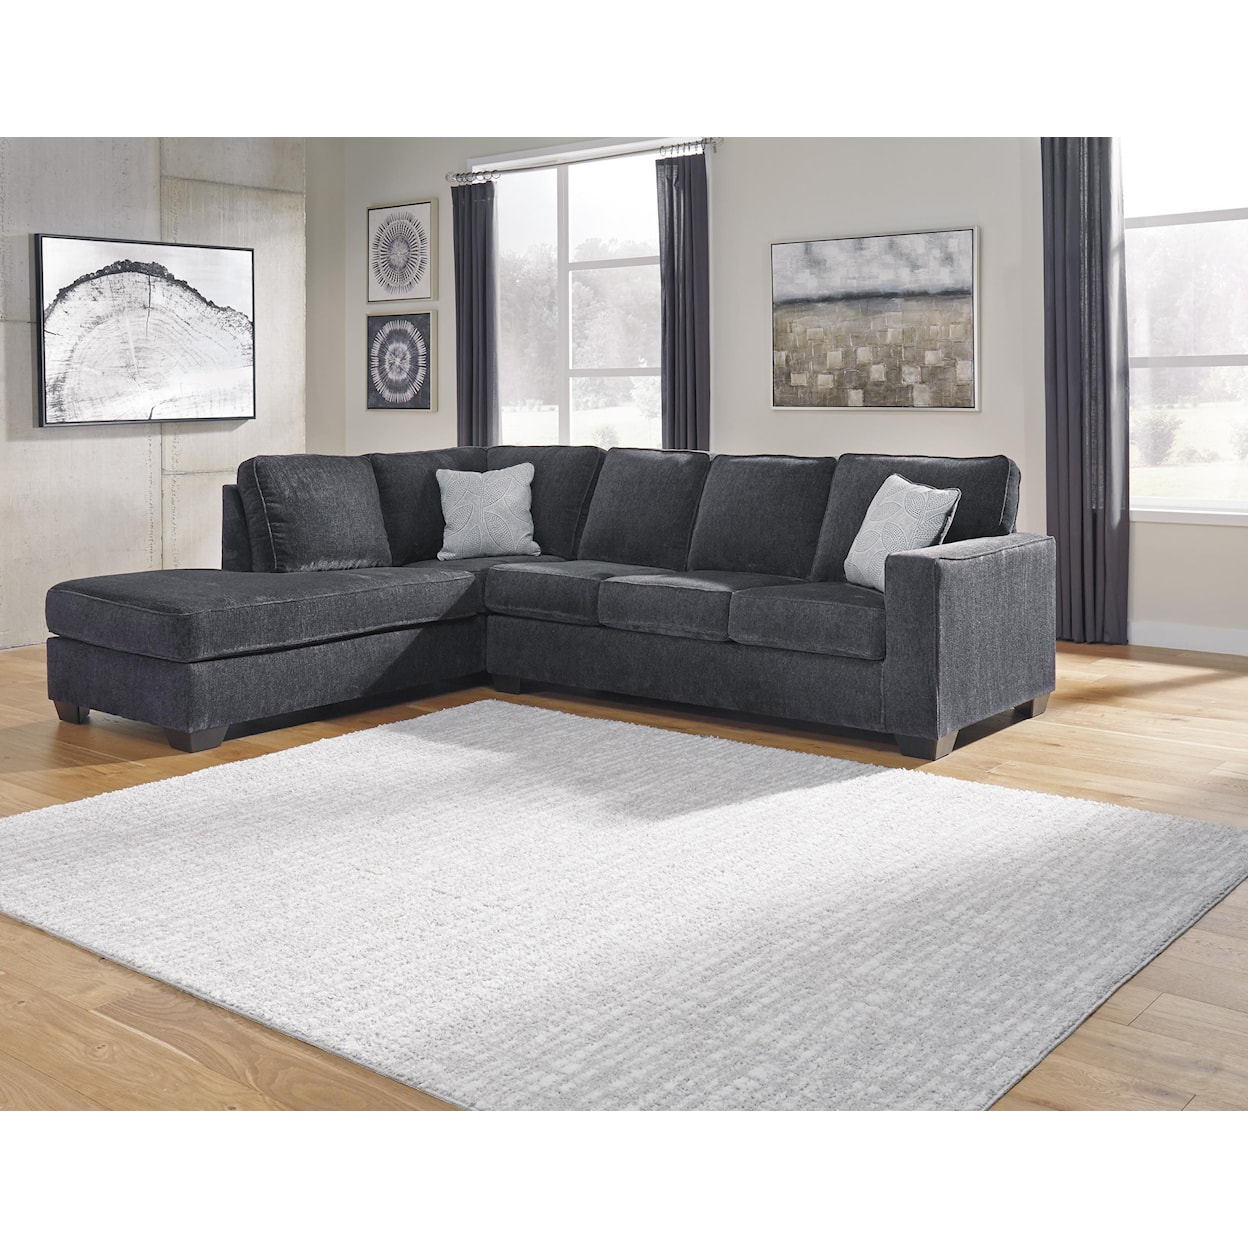 Signature Design by Ashley Altari 2 PC Sectional and Recliner Set